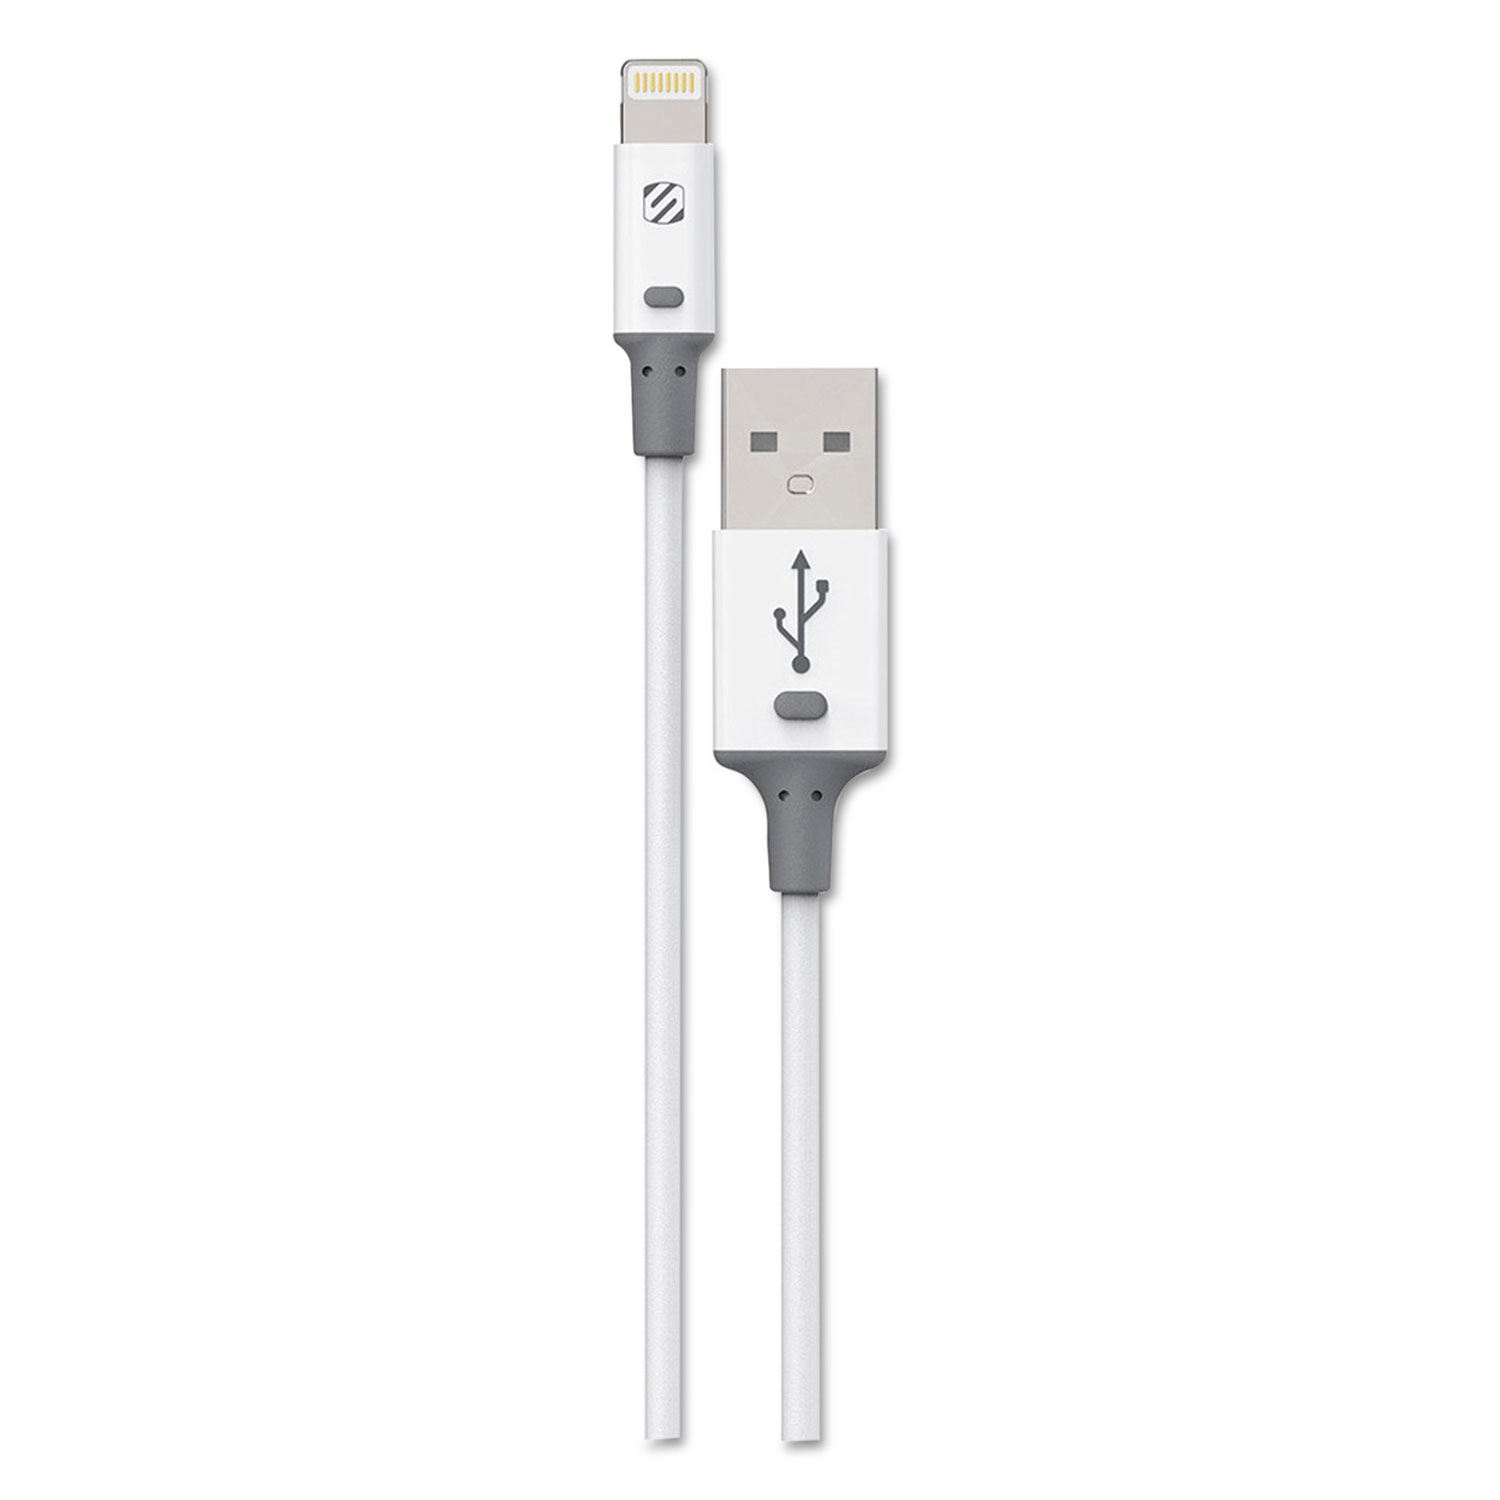  Scosche 12WTA smartSTRIKE II Charge & Sync Cable for Lightning USB Devices, White (SOS12WTA) 